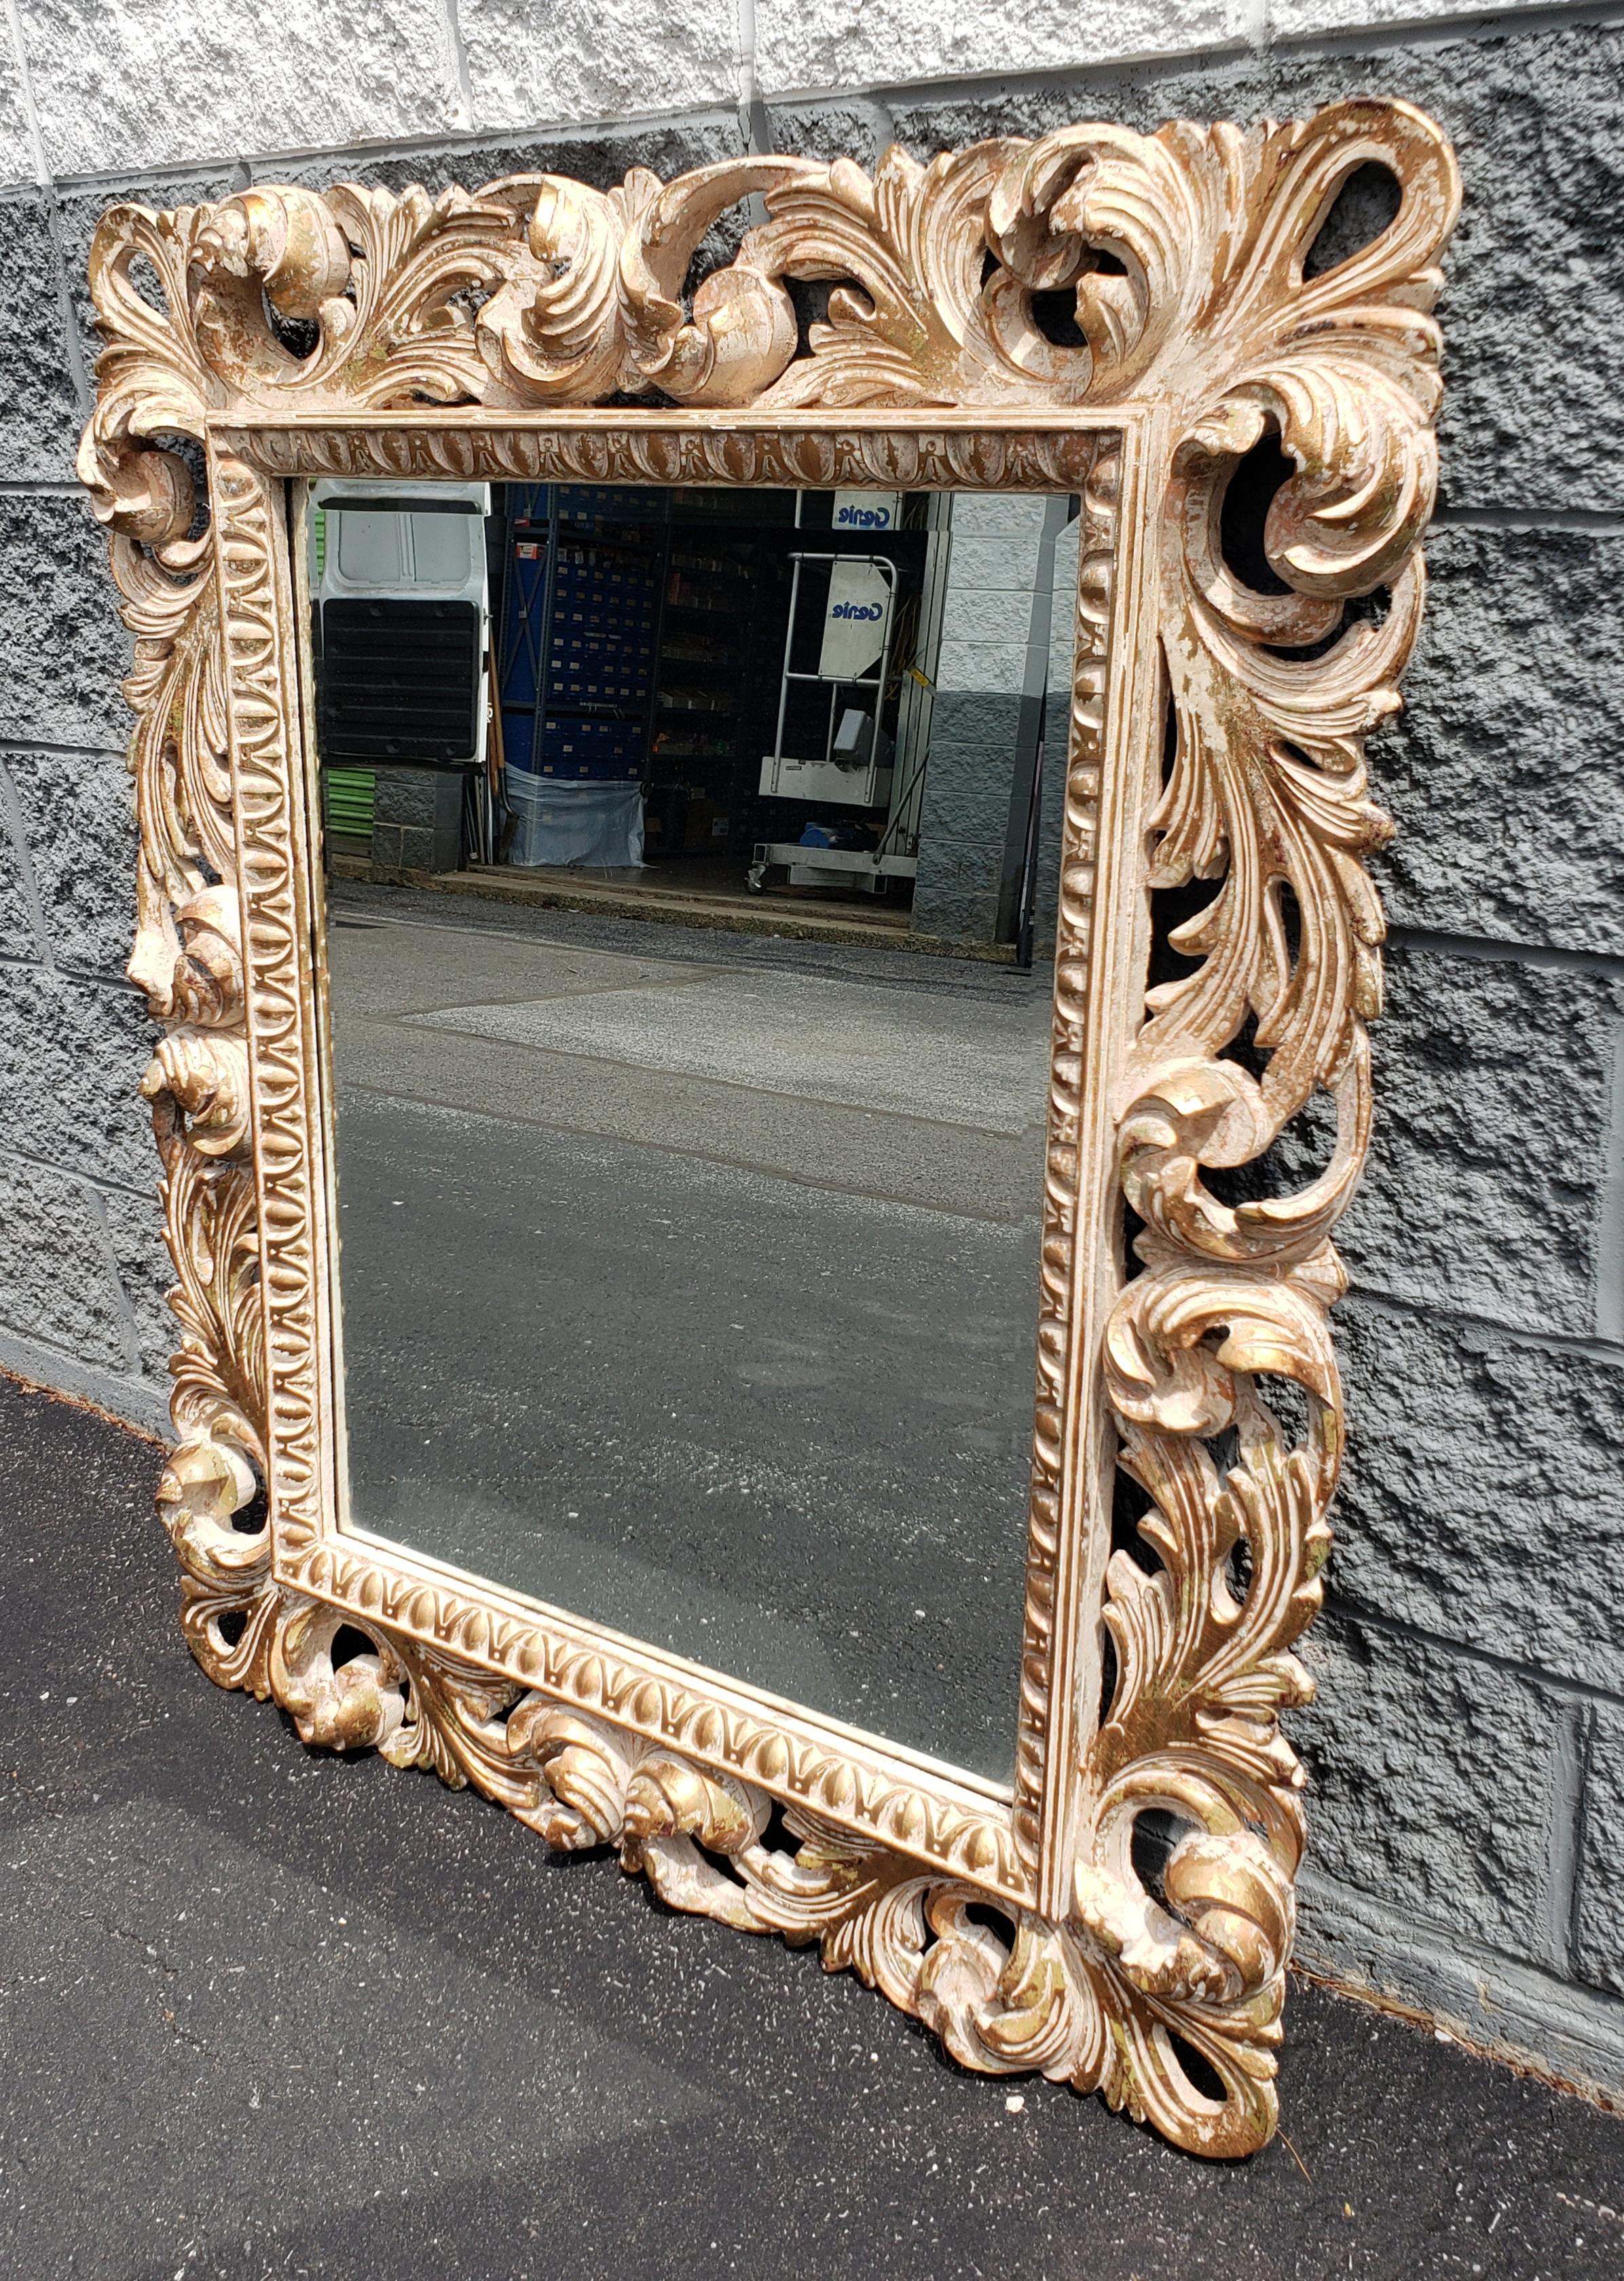 Absolutely gorgeous neoclassical Italian Florentine ornate mirror with intricate carvings.
 
Measures 36